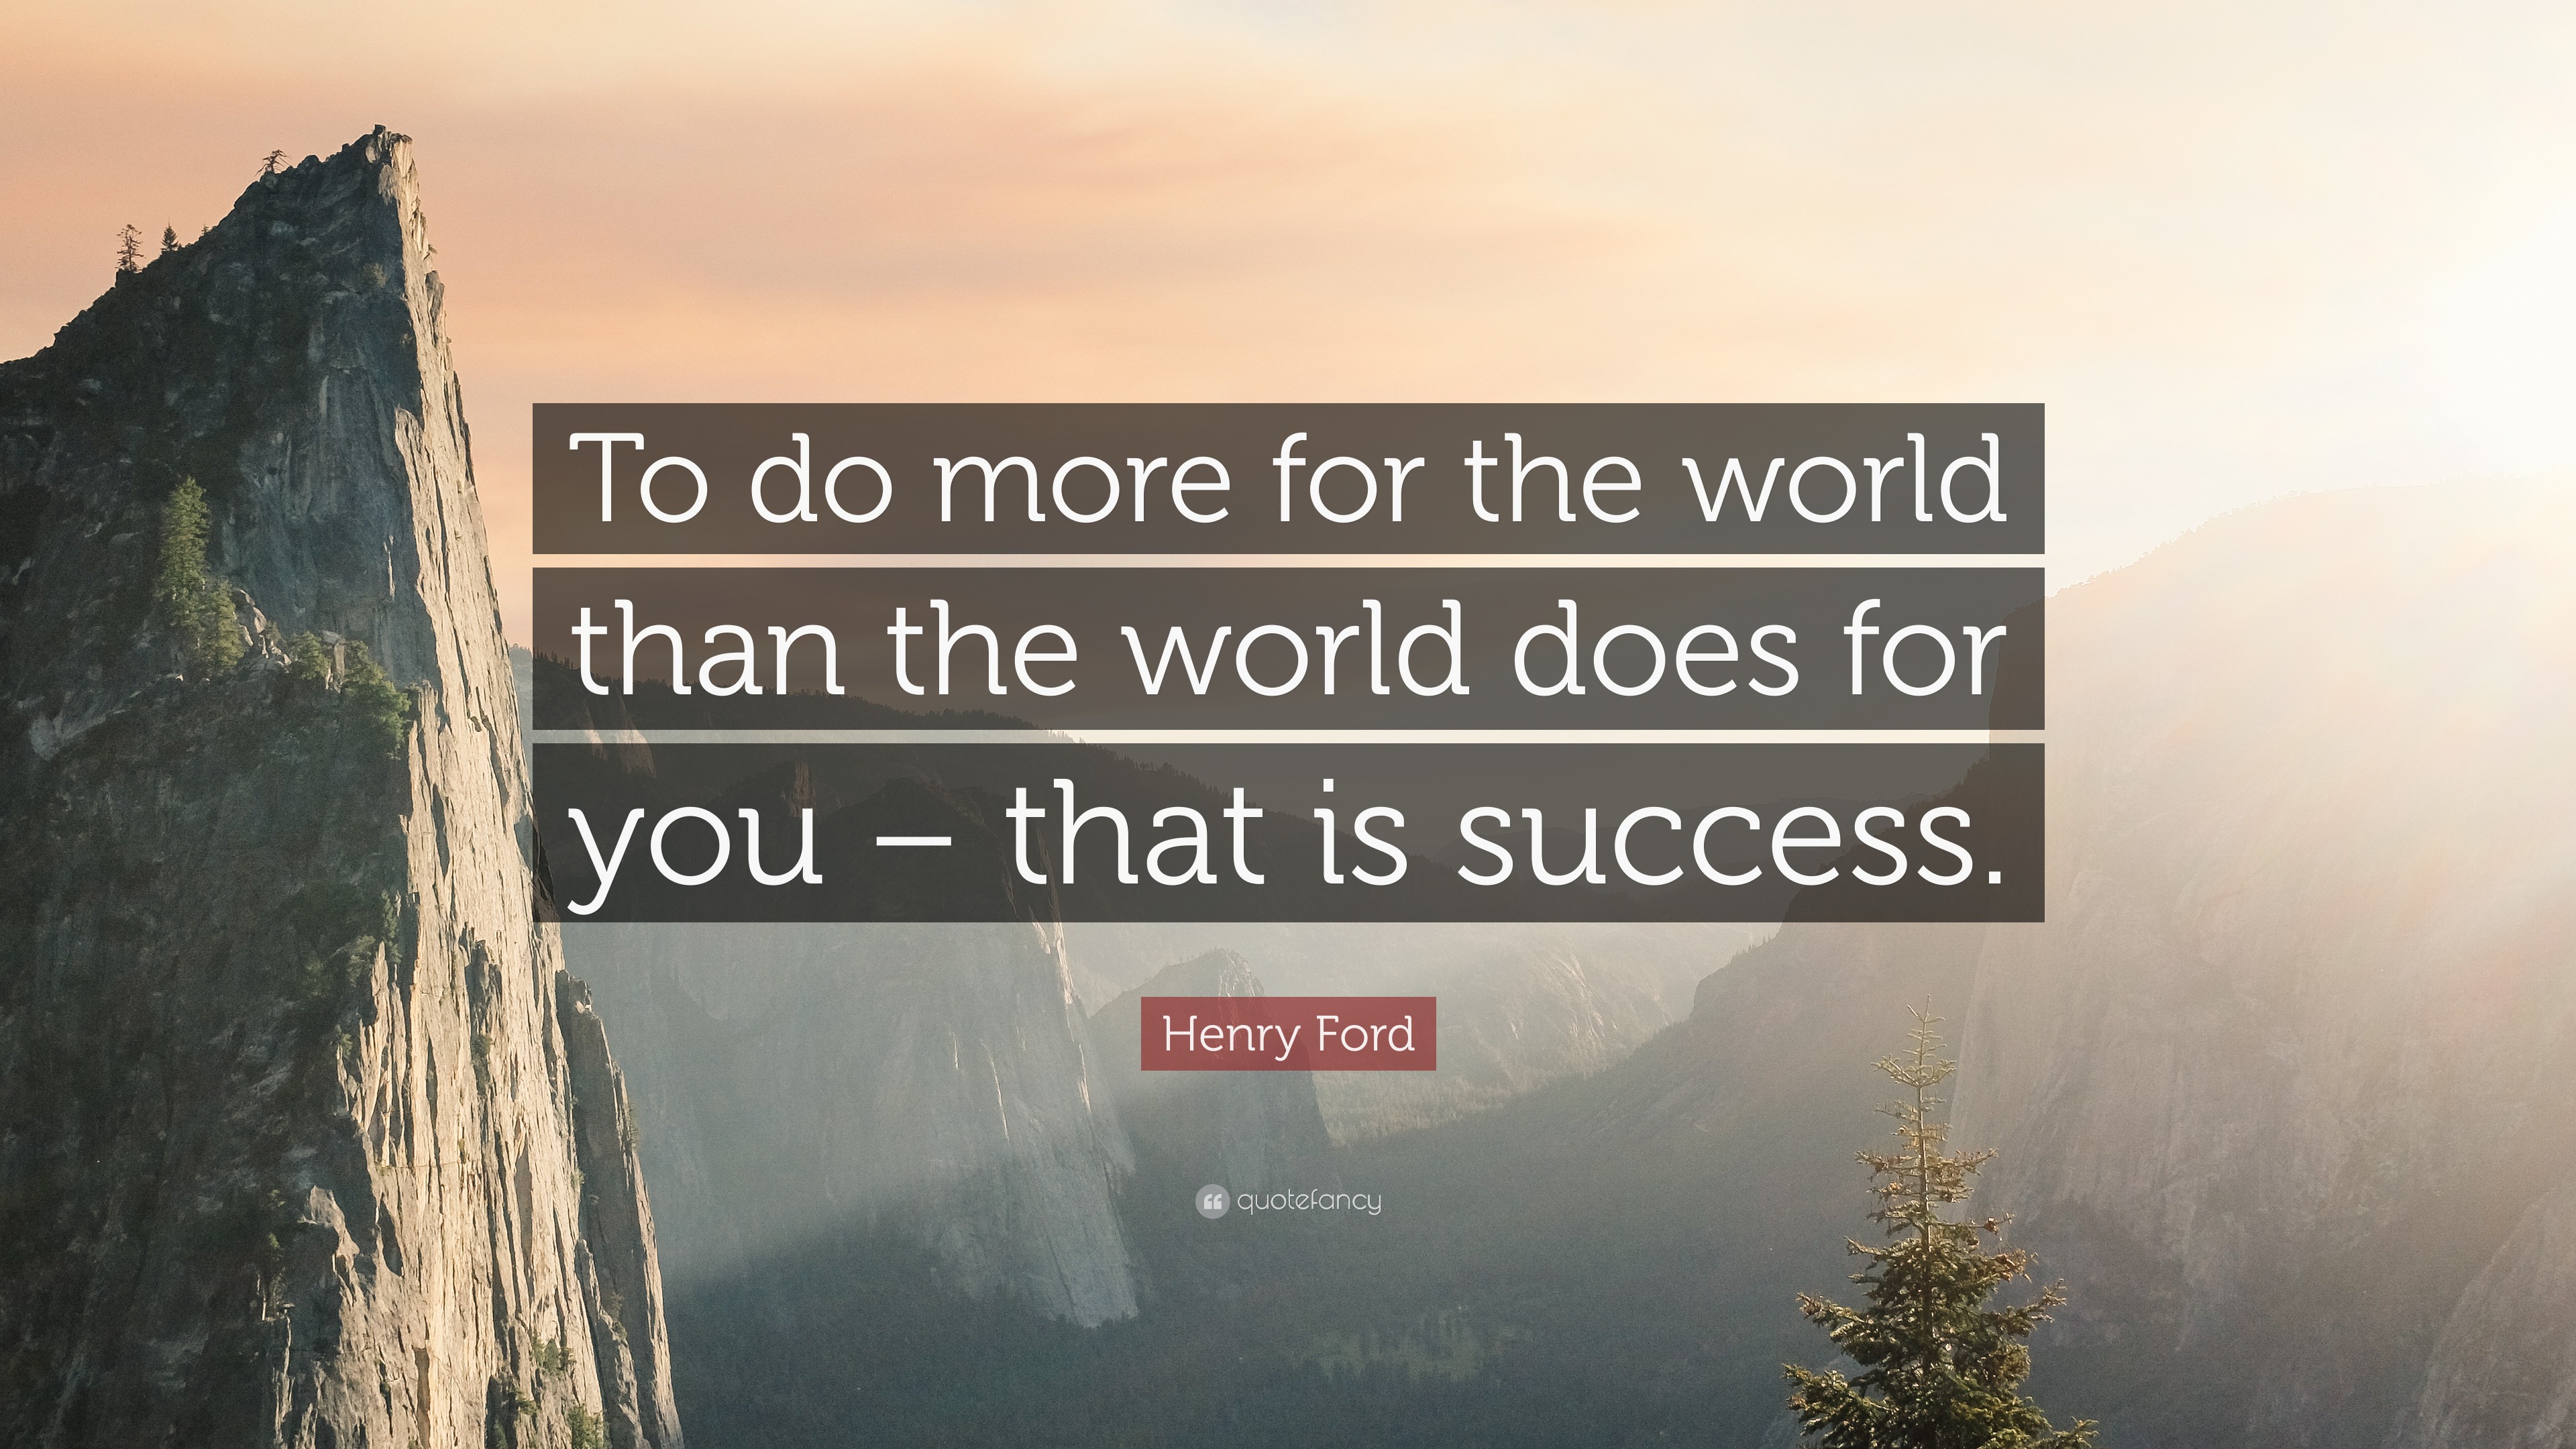 Henry Ford Quote: "To do more for the world than the world ...